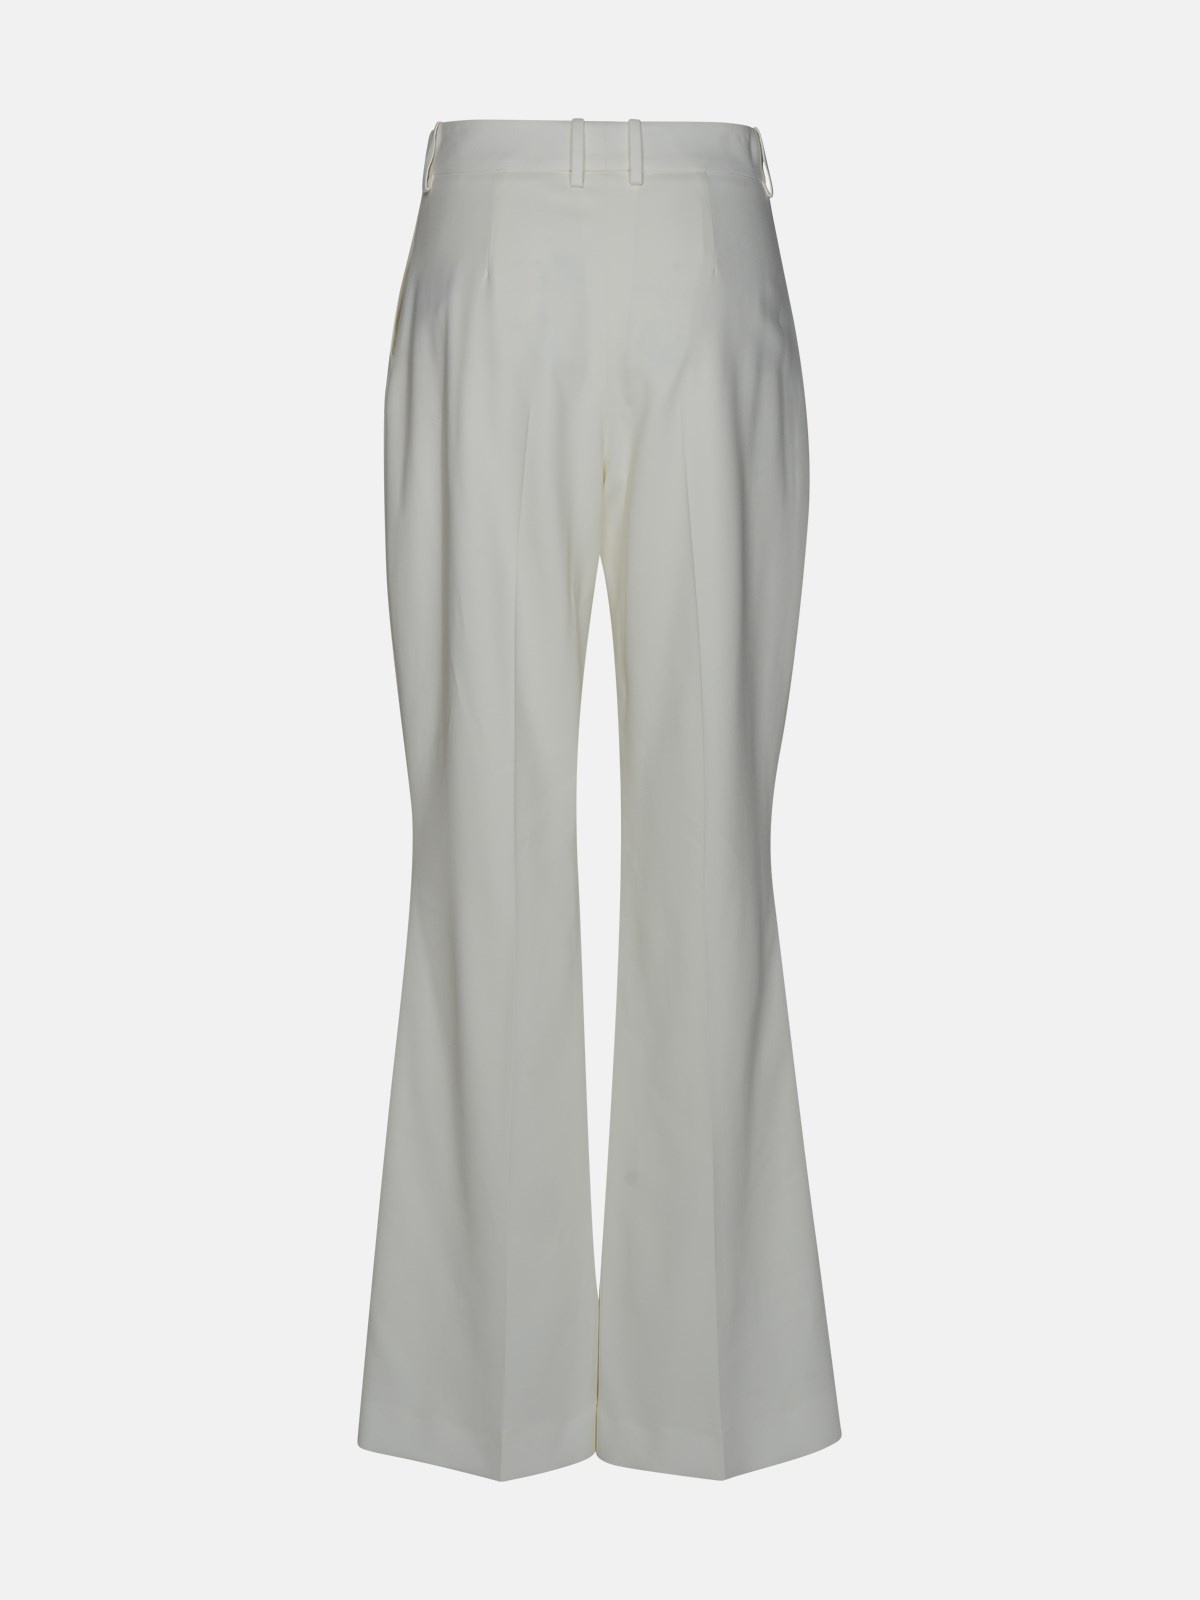 WHITE VISCOSE BLEND TROUSERS - 3